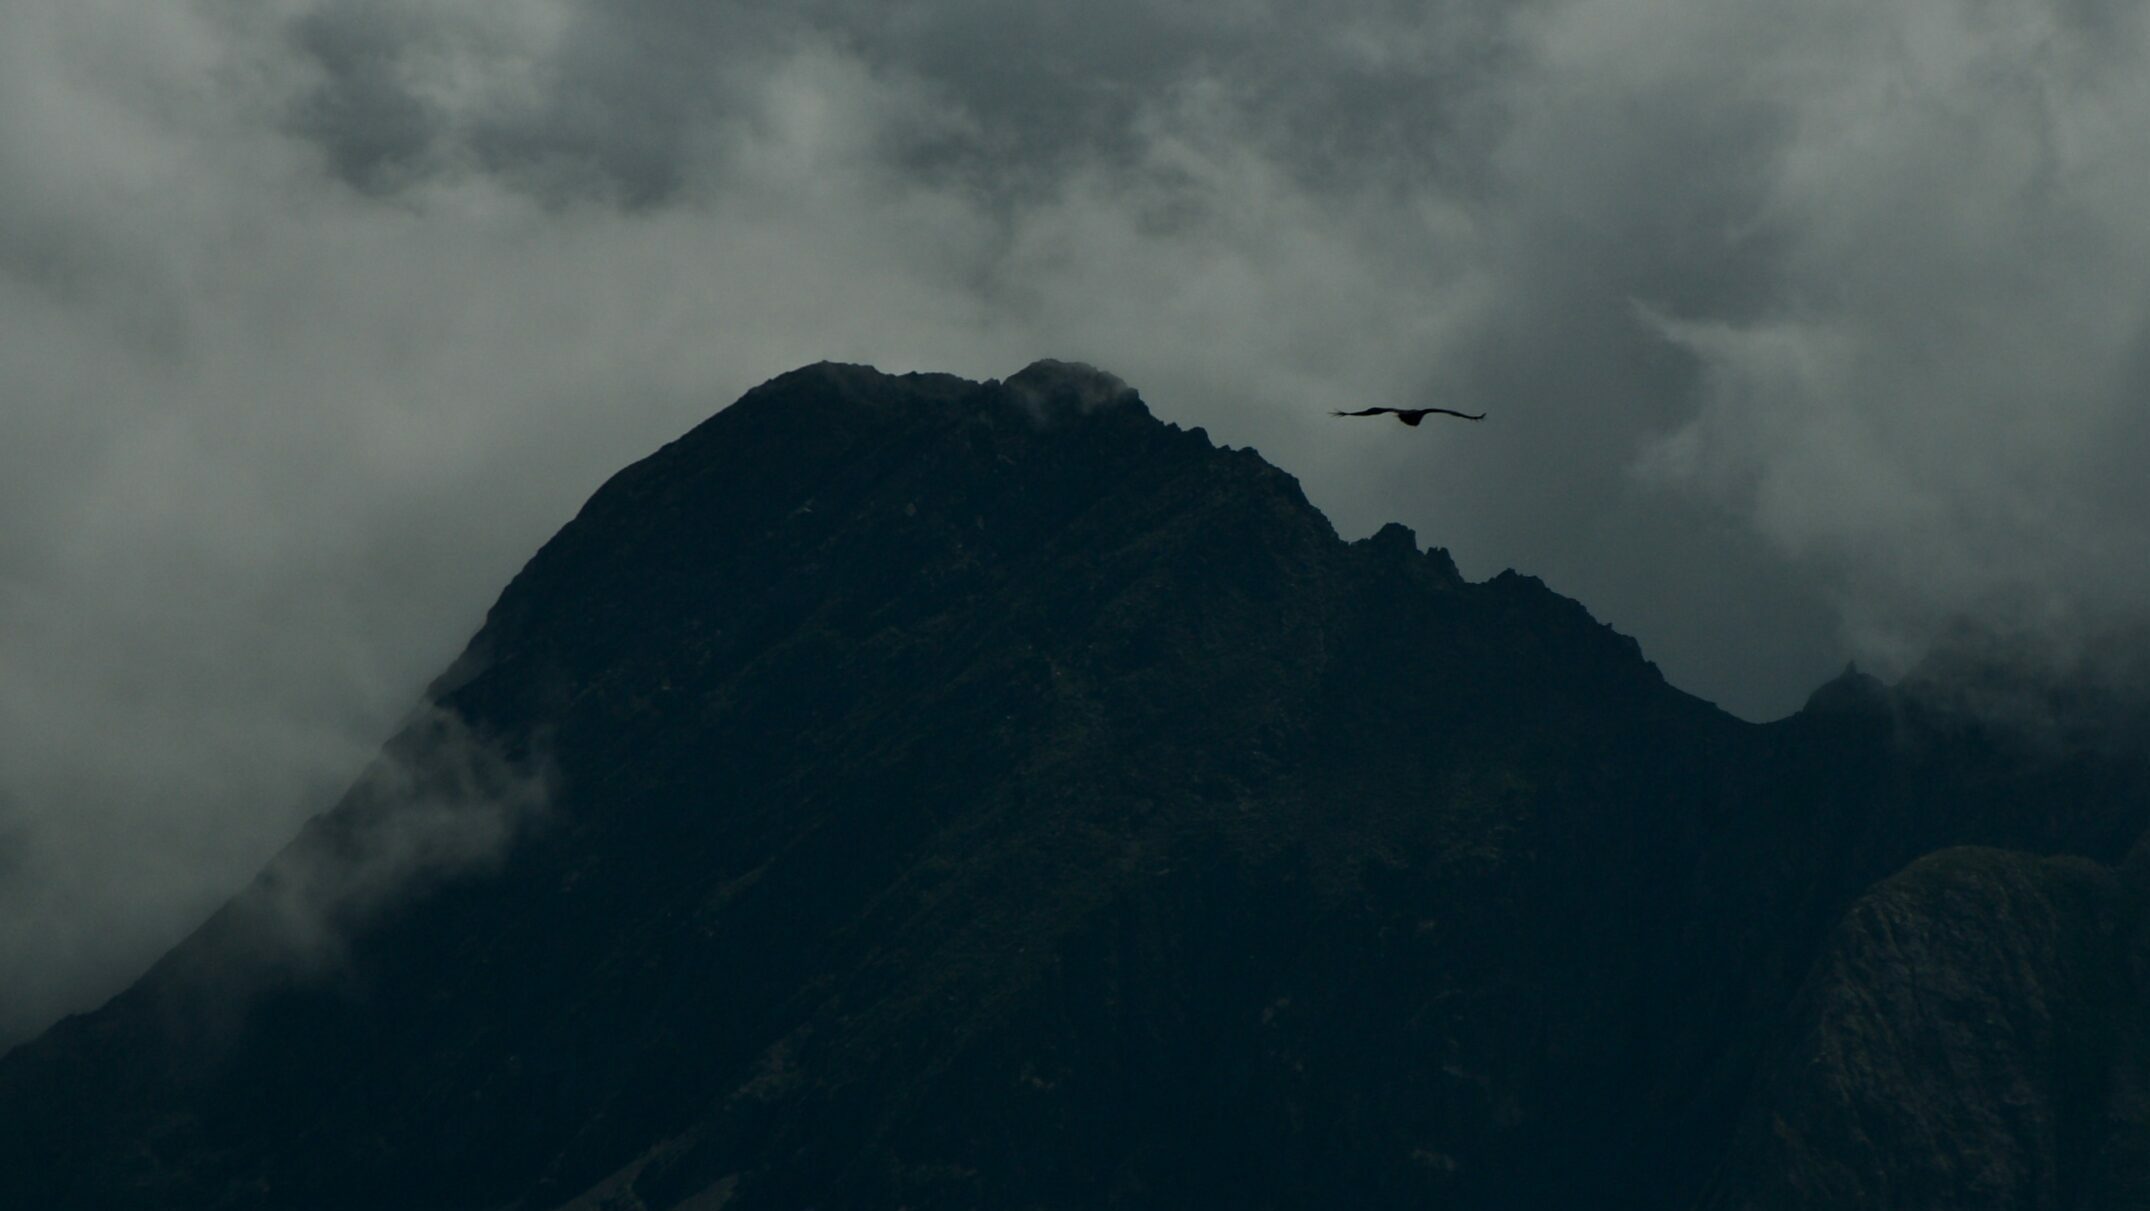 A black and white picture of a pyrenean vulture flying in a tormented sky towards the Pallas peak, seemingly towards new horizons